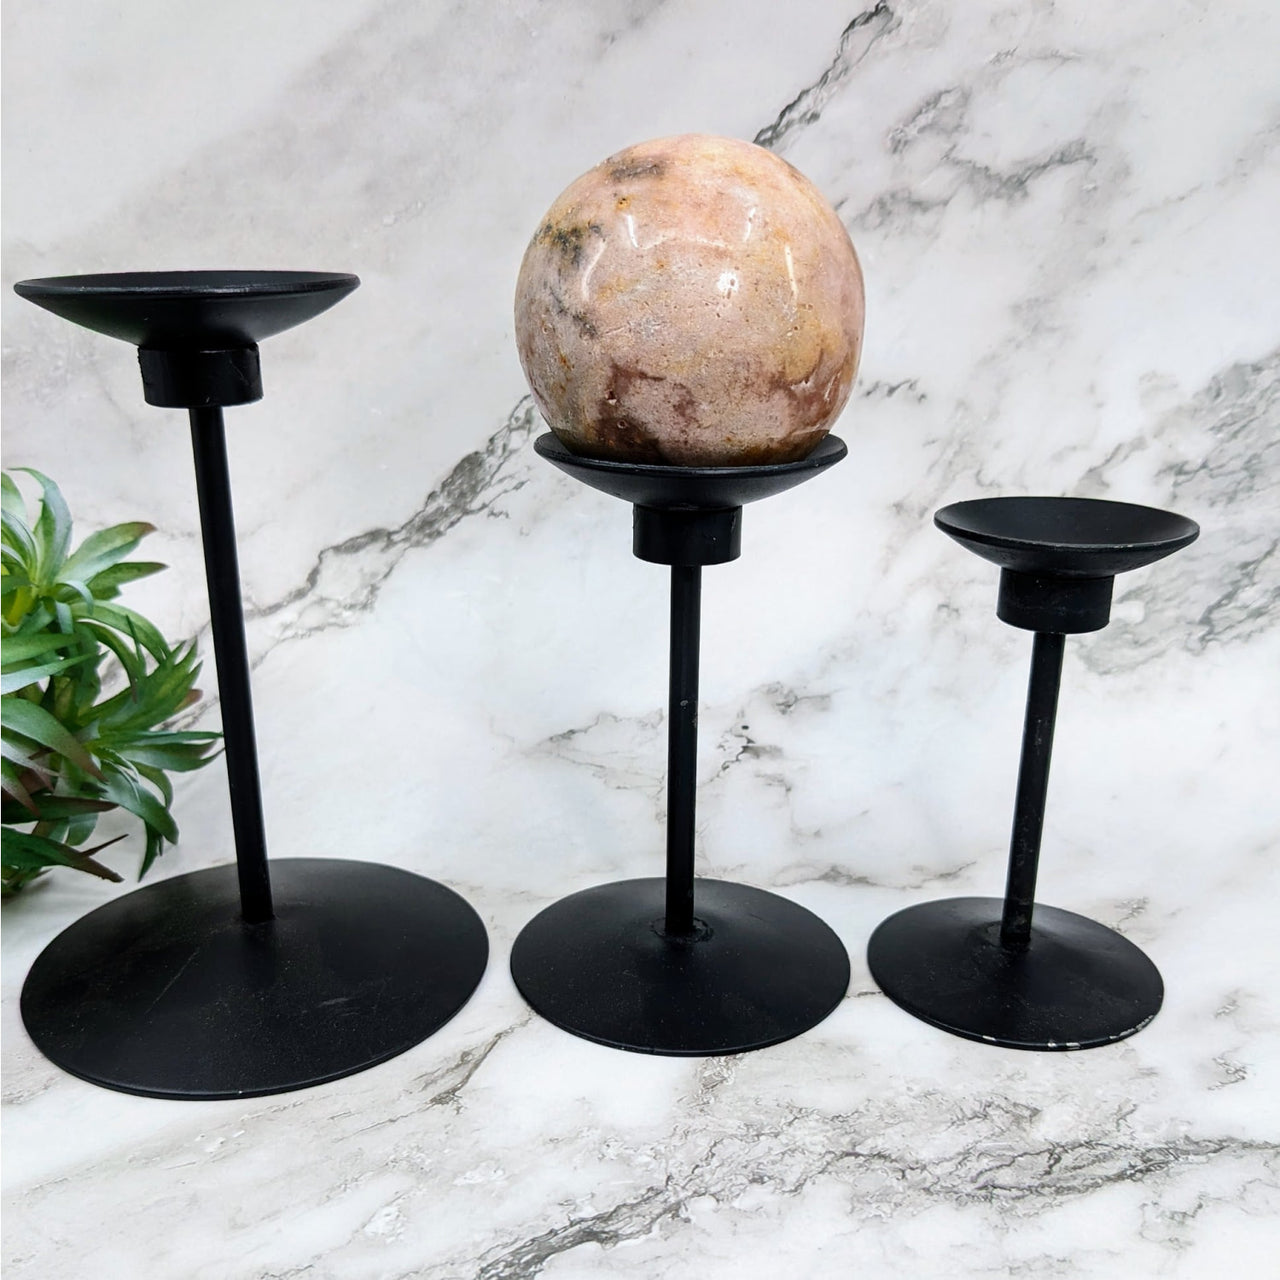 Metal Rotating Sphere Stand #LV4033 - Three Black Metal Candle Holders with Marble Globe